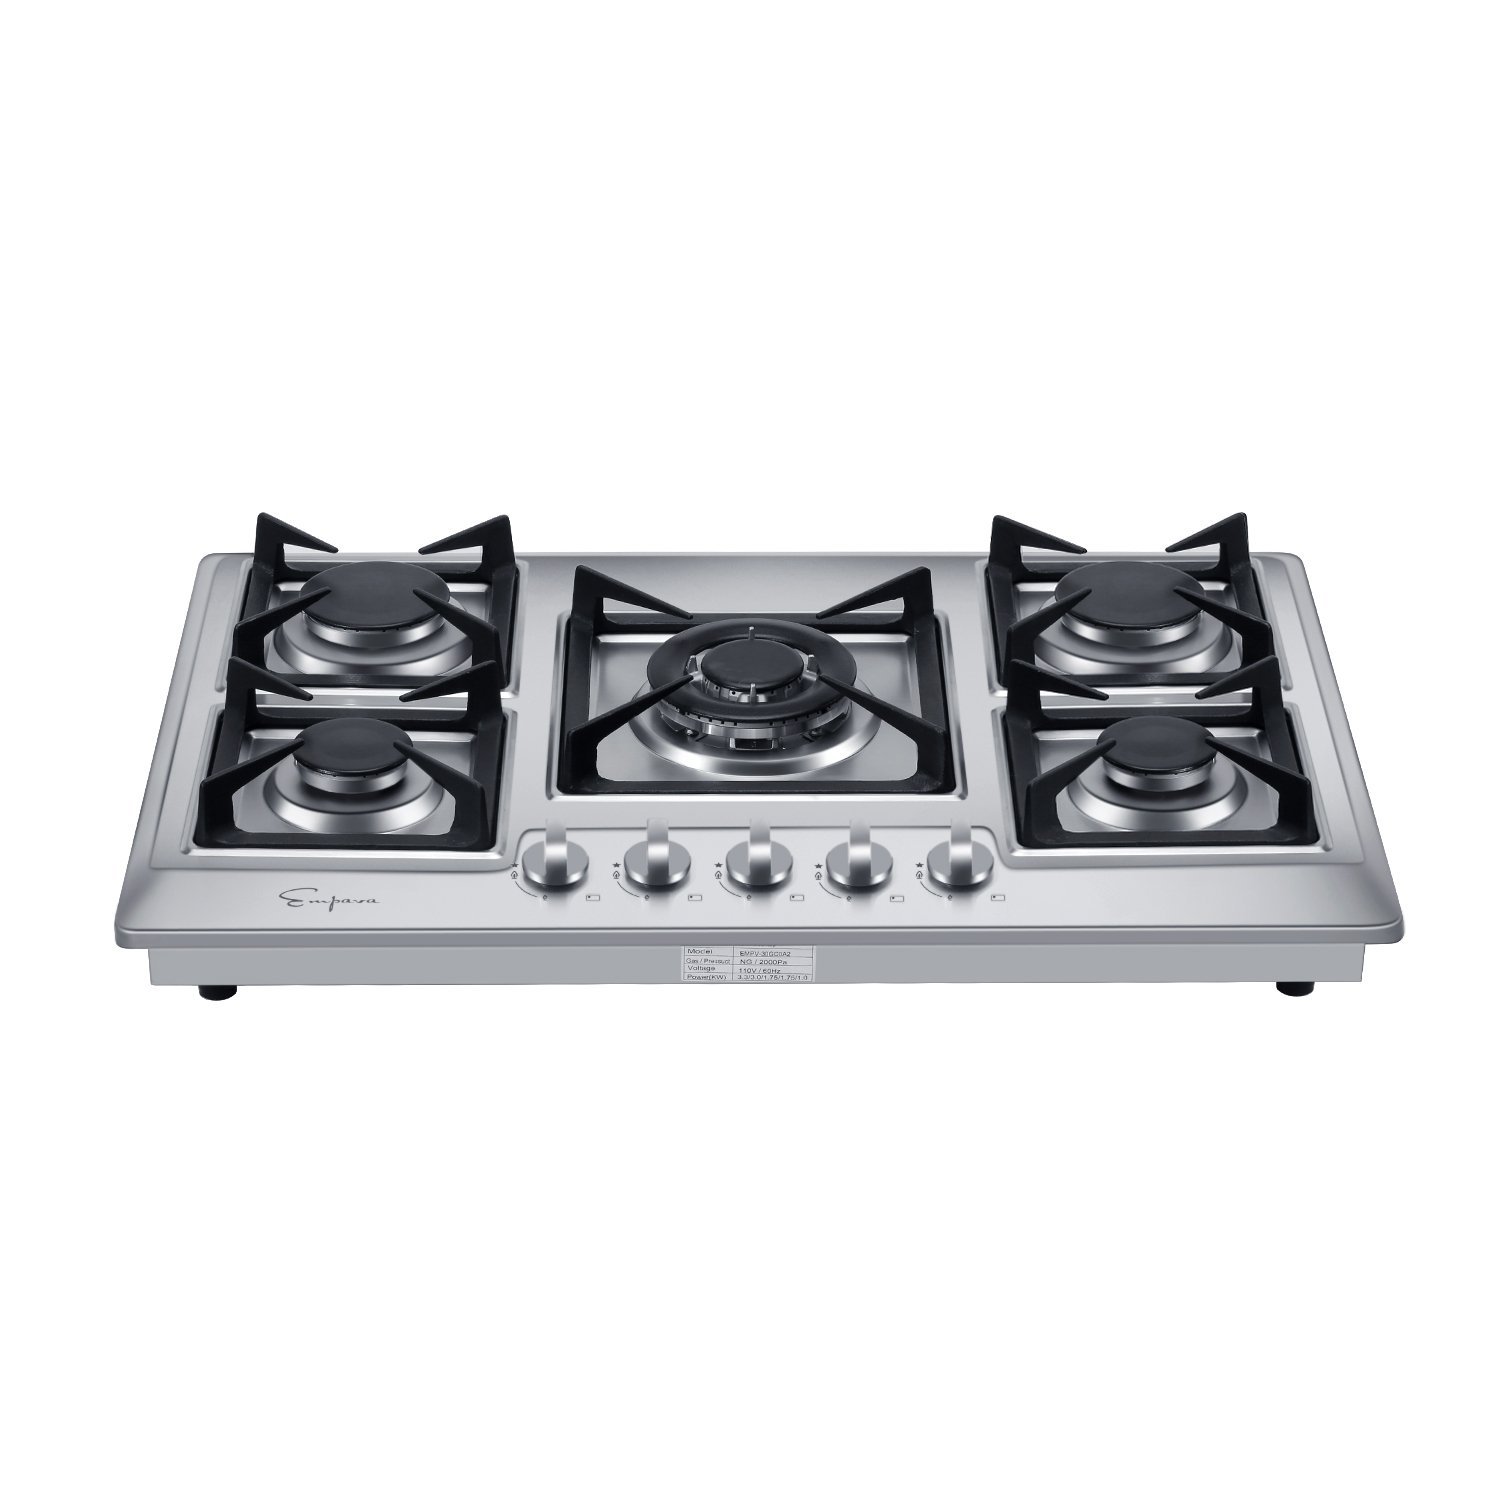 Empava 24 in. Gas Stove Cooktop with 4 Sealed Burners-Heavy Duty Continuous Grates-NG/LPG Convertible-Black Tempered Glass Surface, 24 Inch